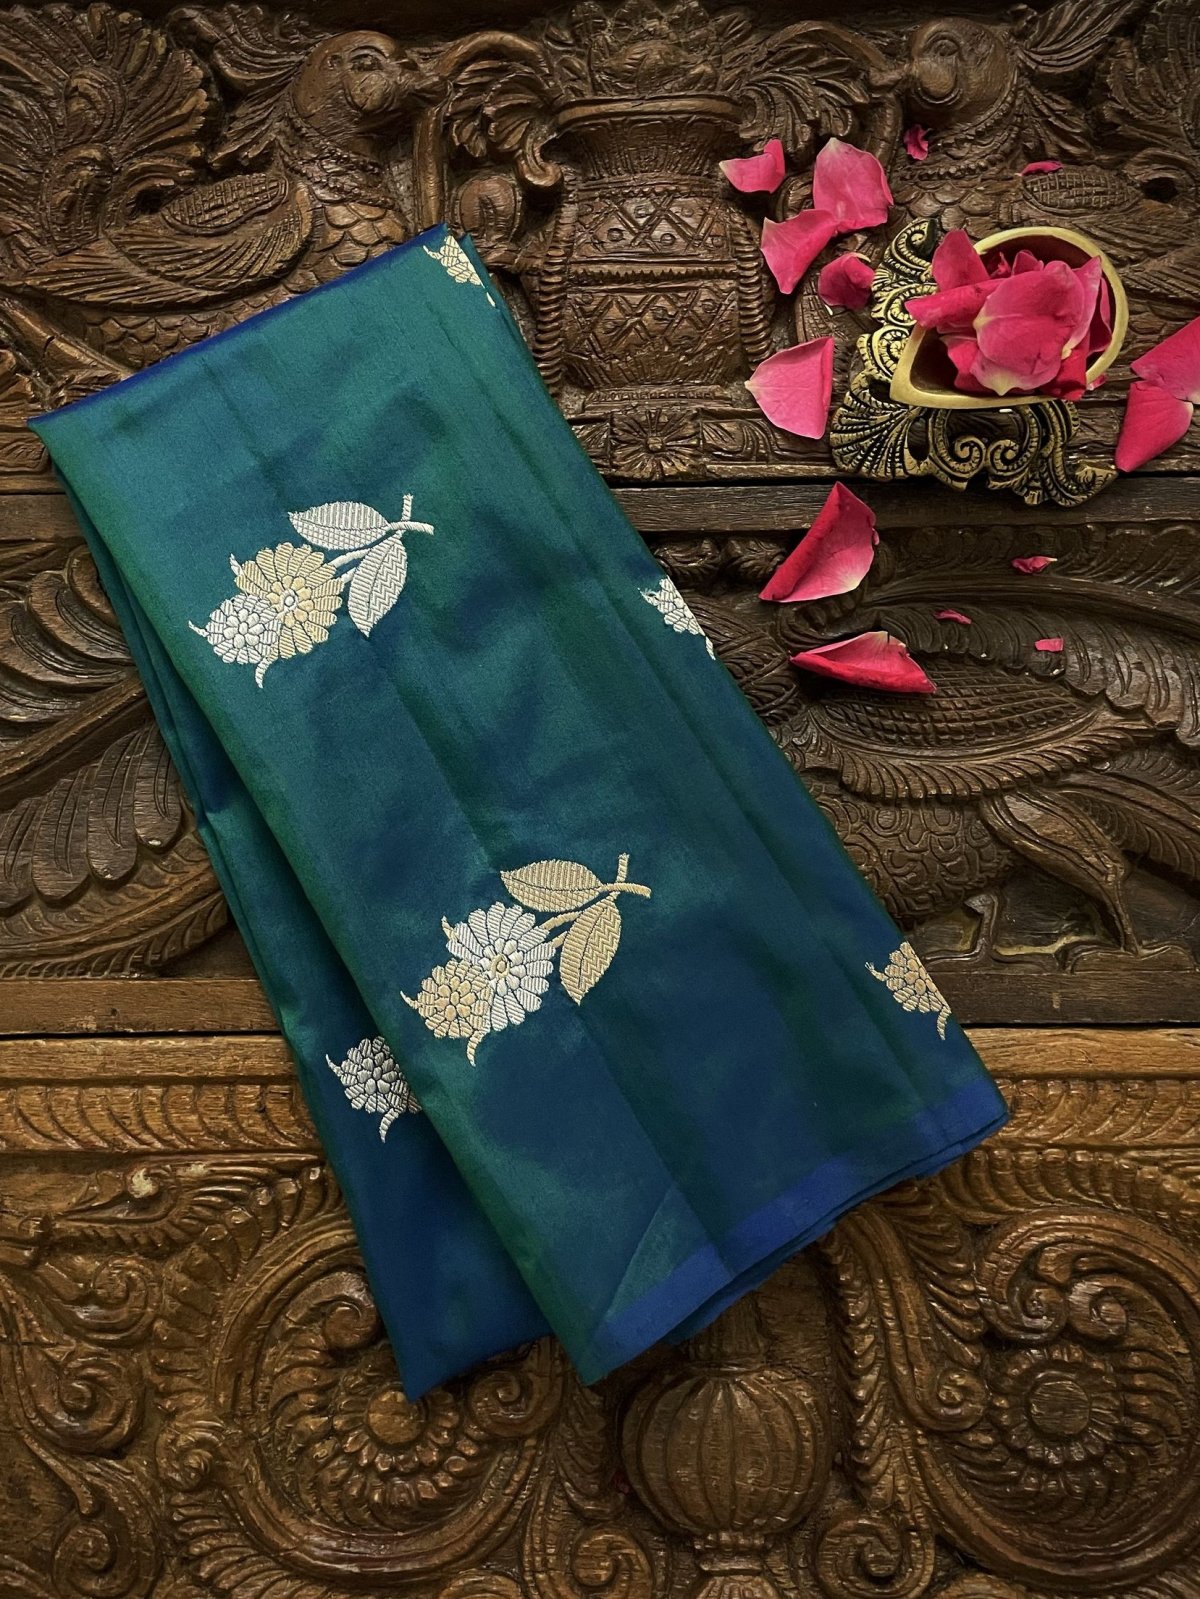 Blue-Green Banaras Silk Blouse With Gold and Silver Zari Floral Butties